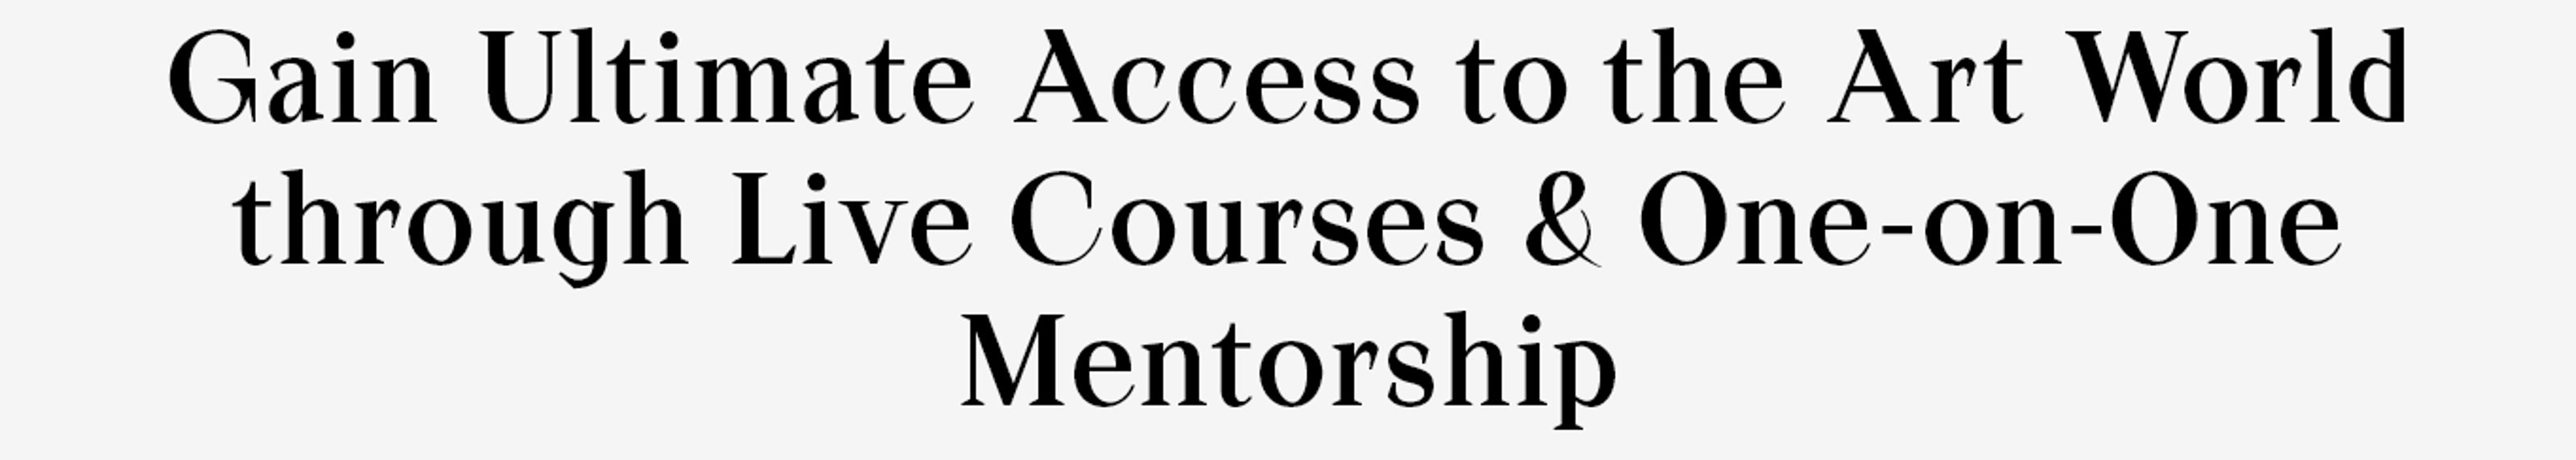 Gain Ultimate Access to the Art World through Live Courses & One-on-One Mentorship